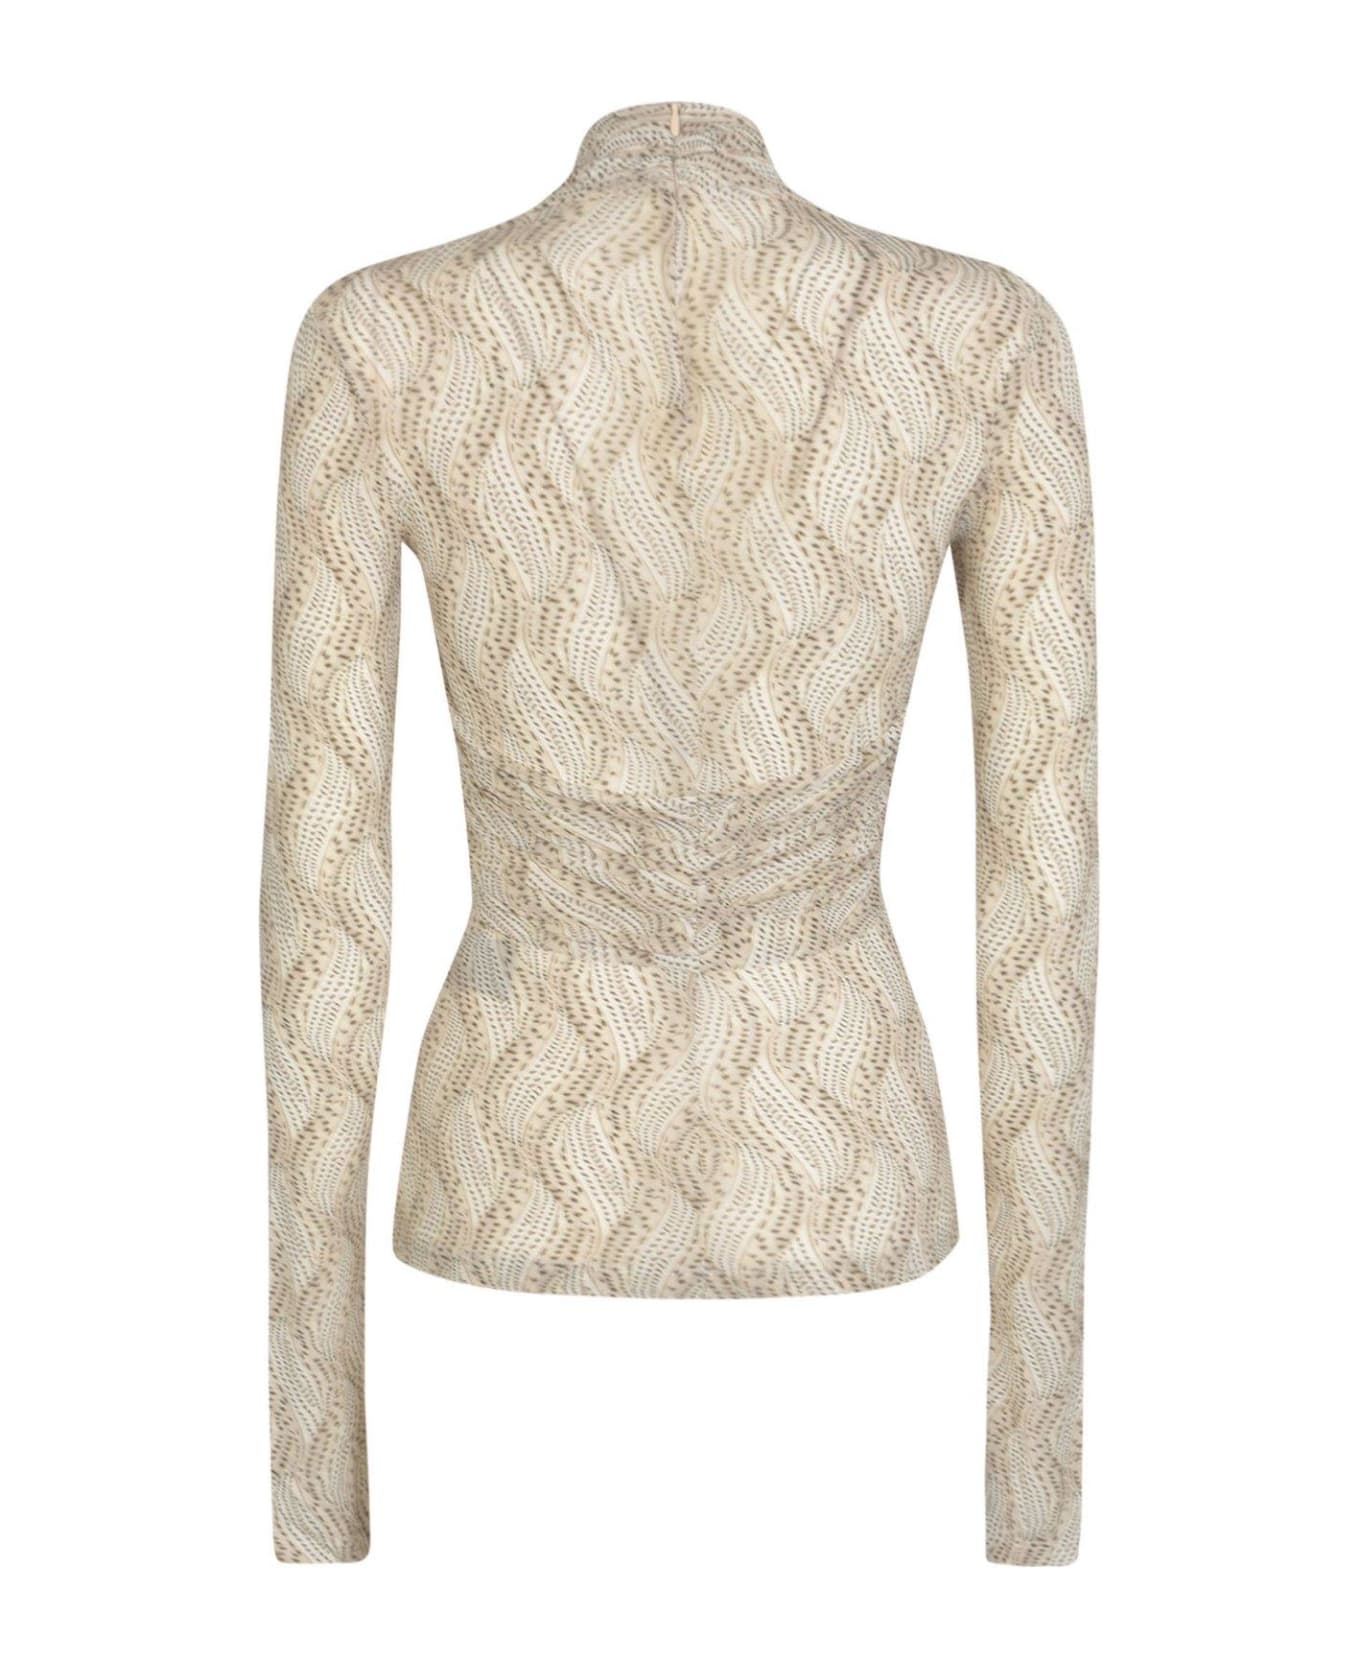 Isabel Marant Cut-out Detailed Crossover Neck Top - Beige